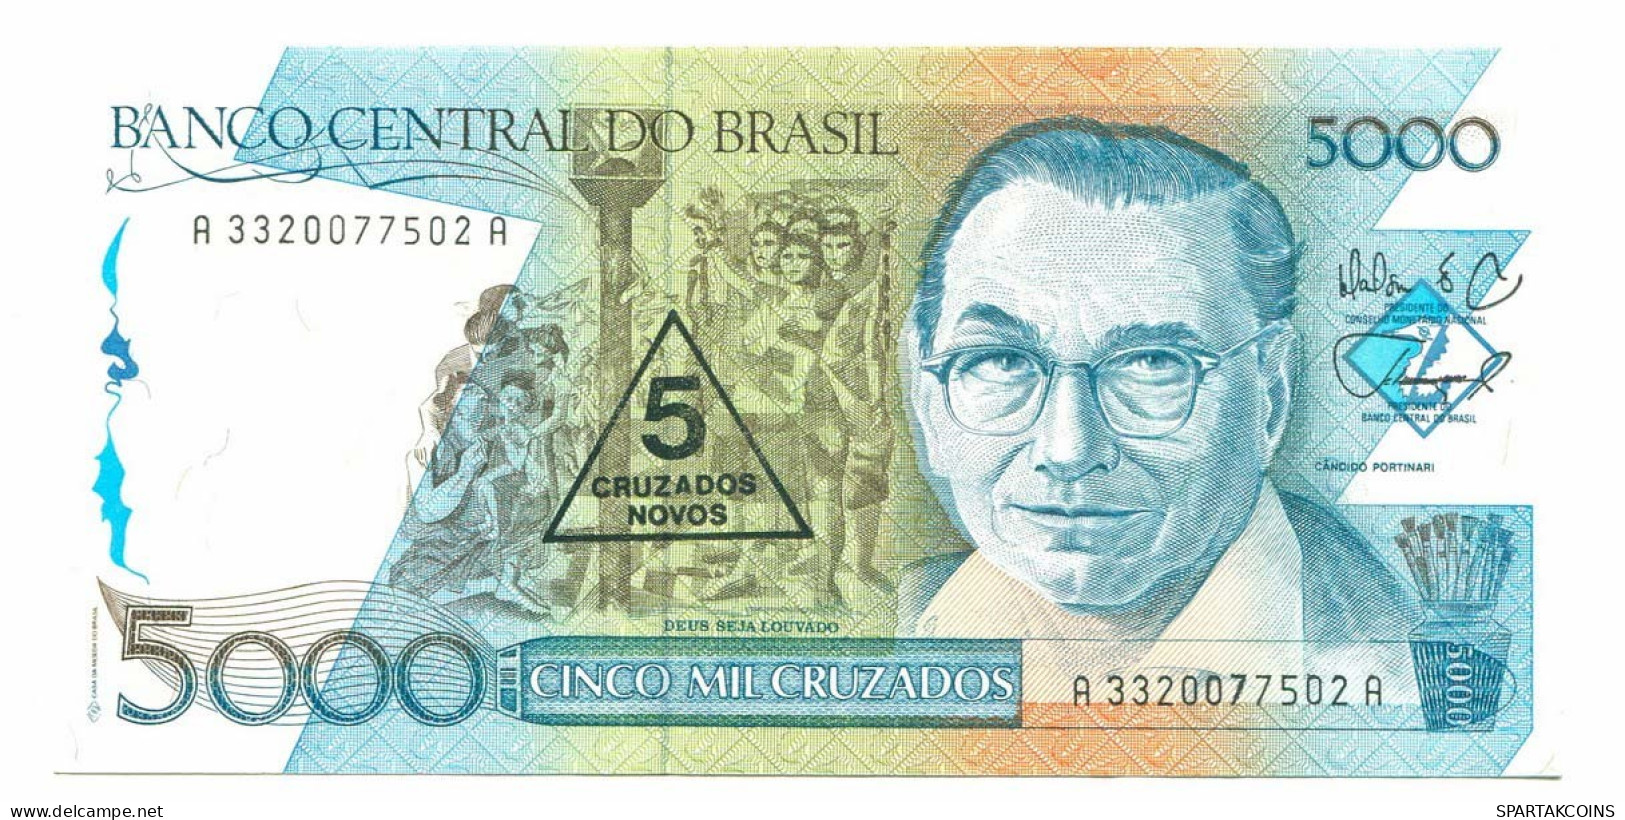 BRASIL 5000 CRUZADOS 1988 UNC Paper Money Banknote #P10879.4 - [11] Local Banknote Issues